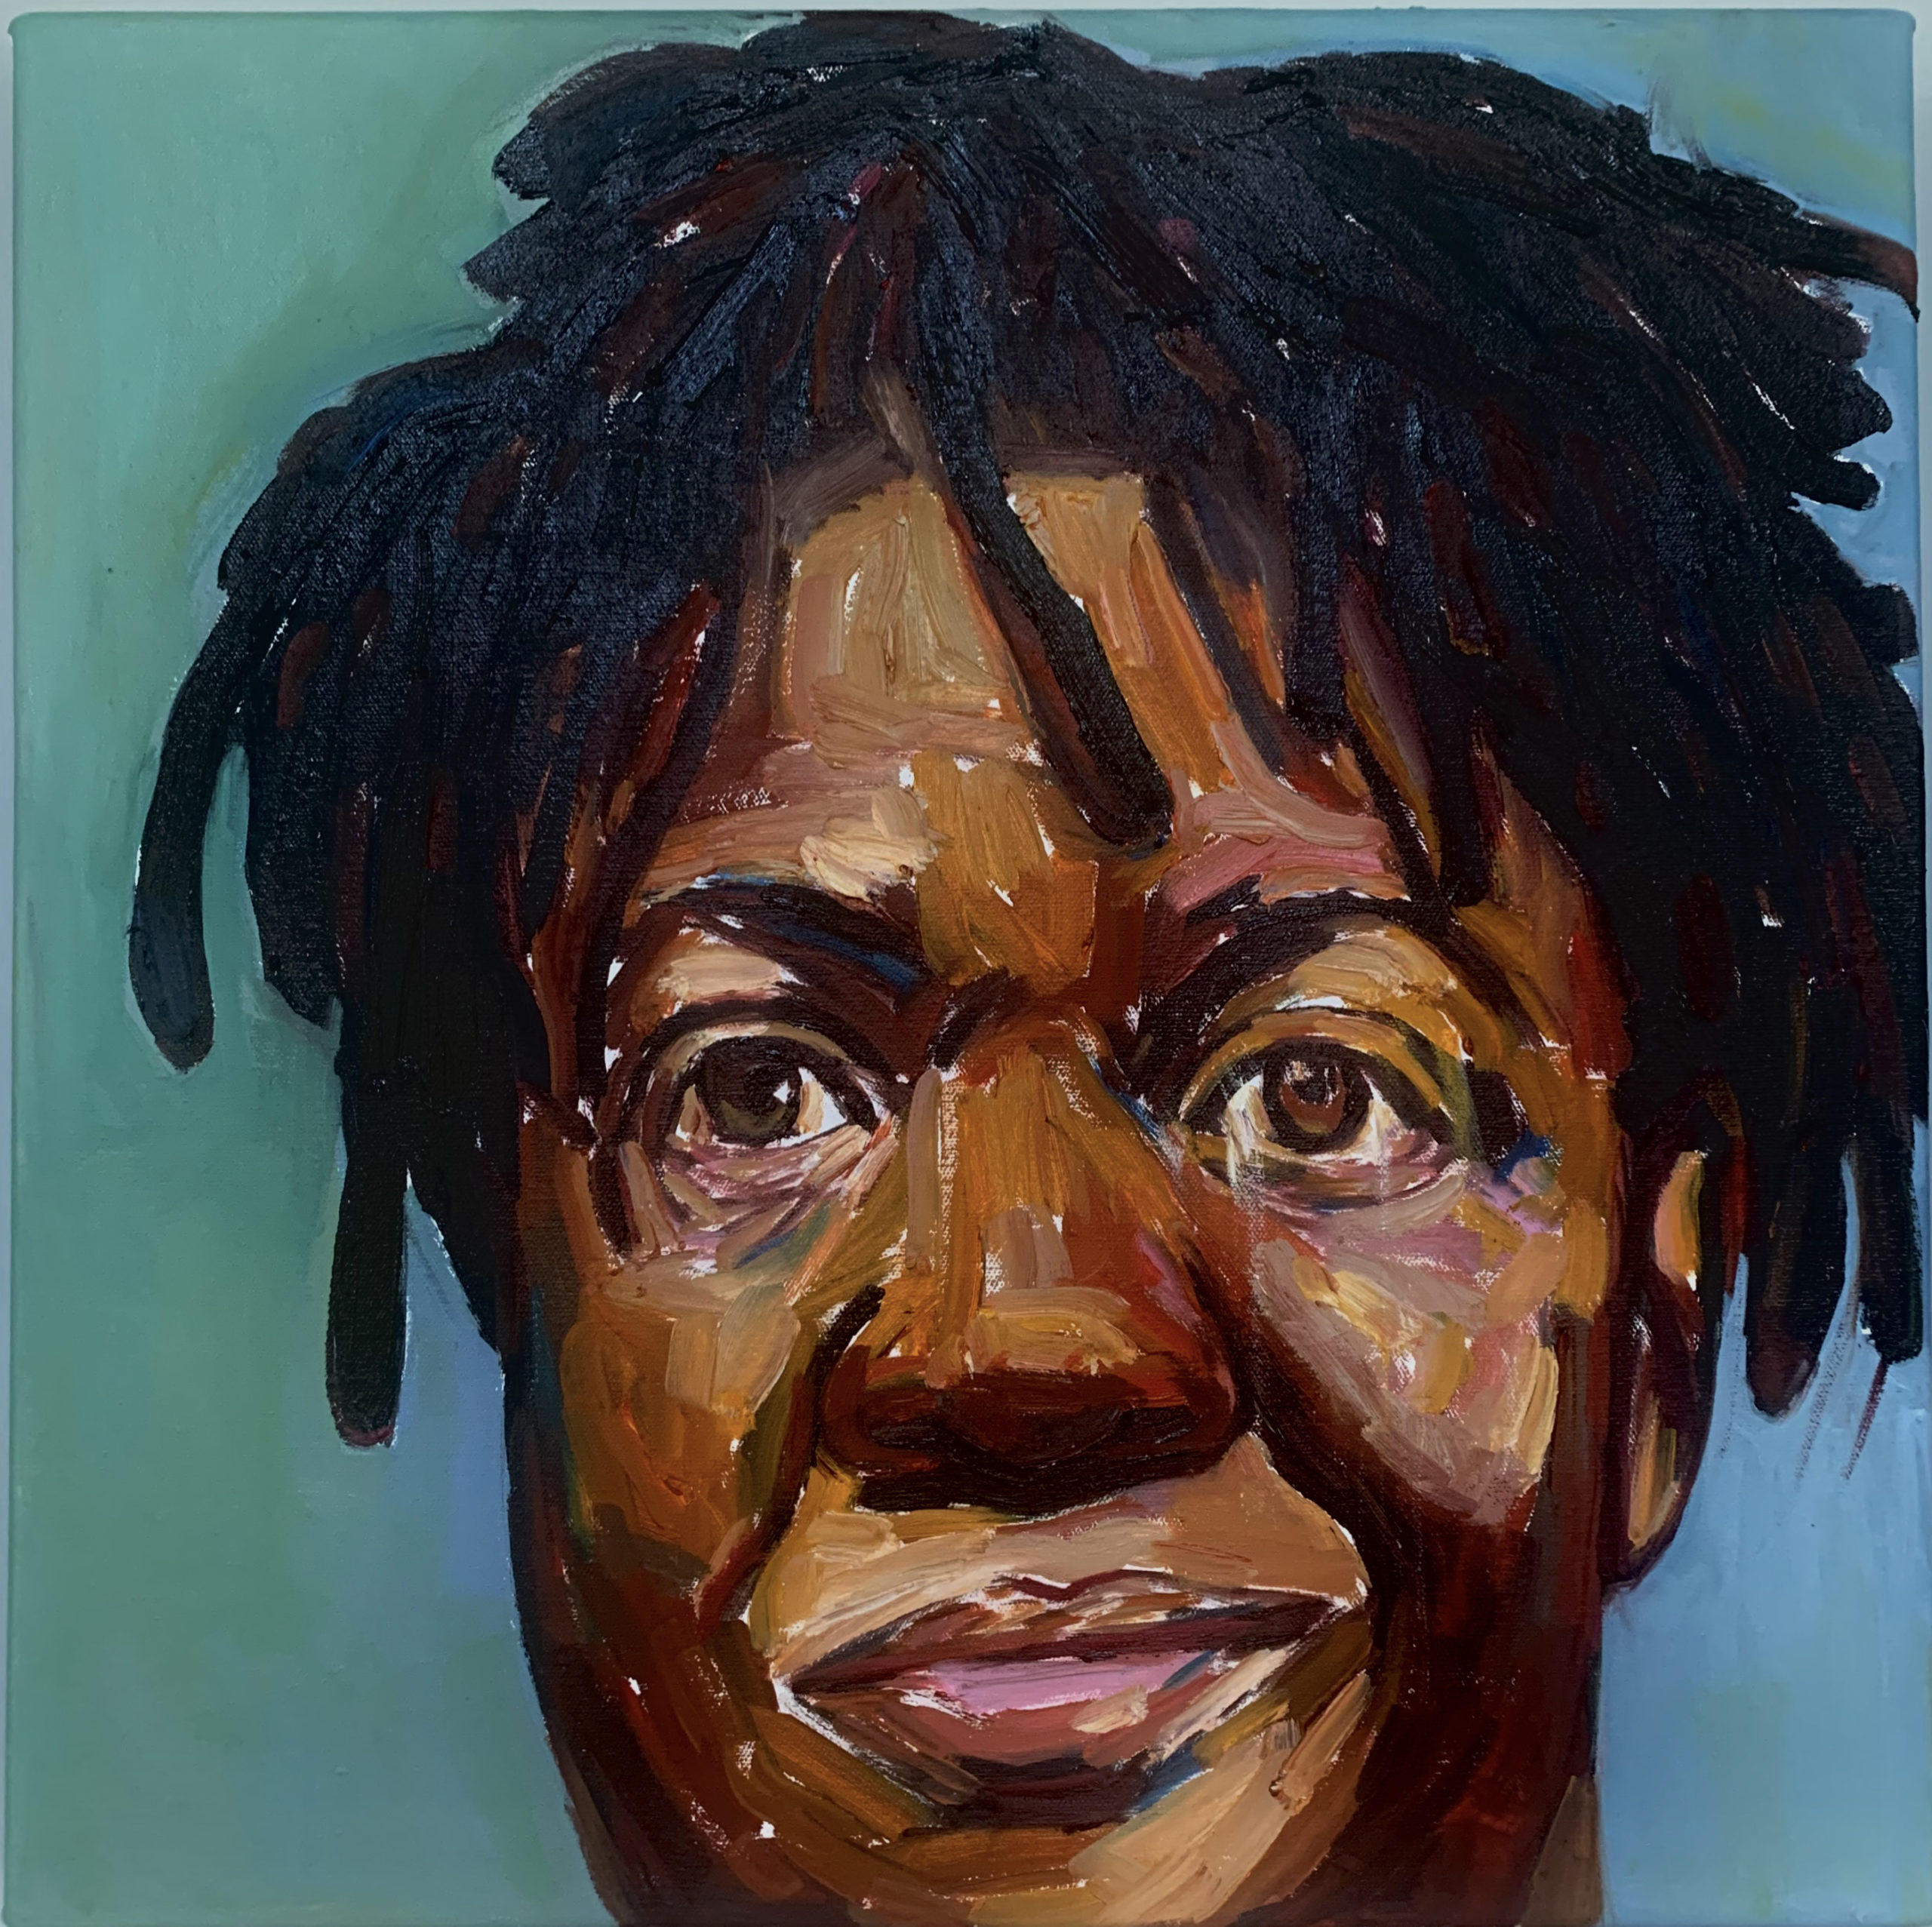 Covid Cut by Beverly McIver, oil on canvas, 20 x 20 at Craven Allen Gallery  15,000